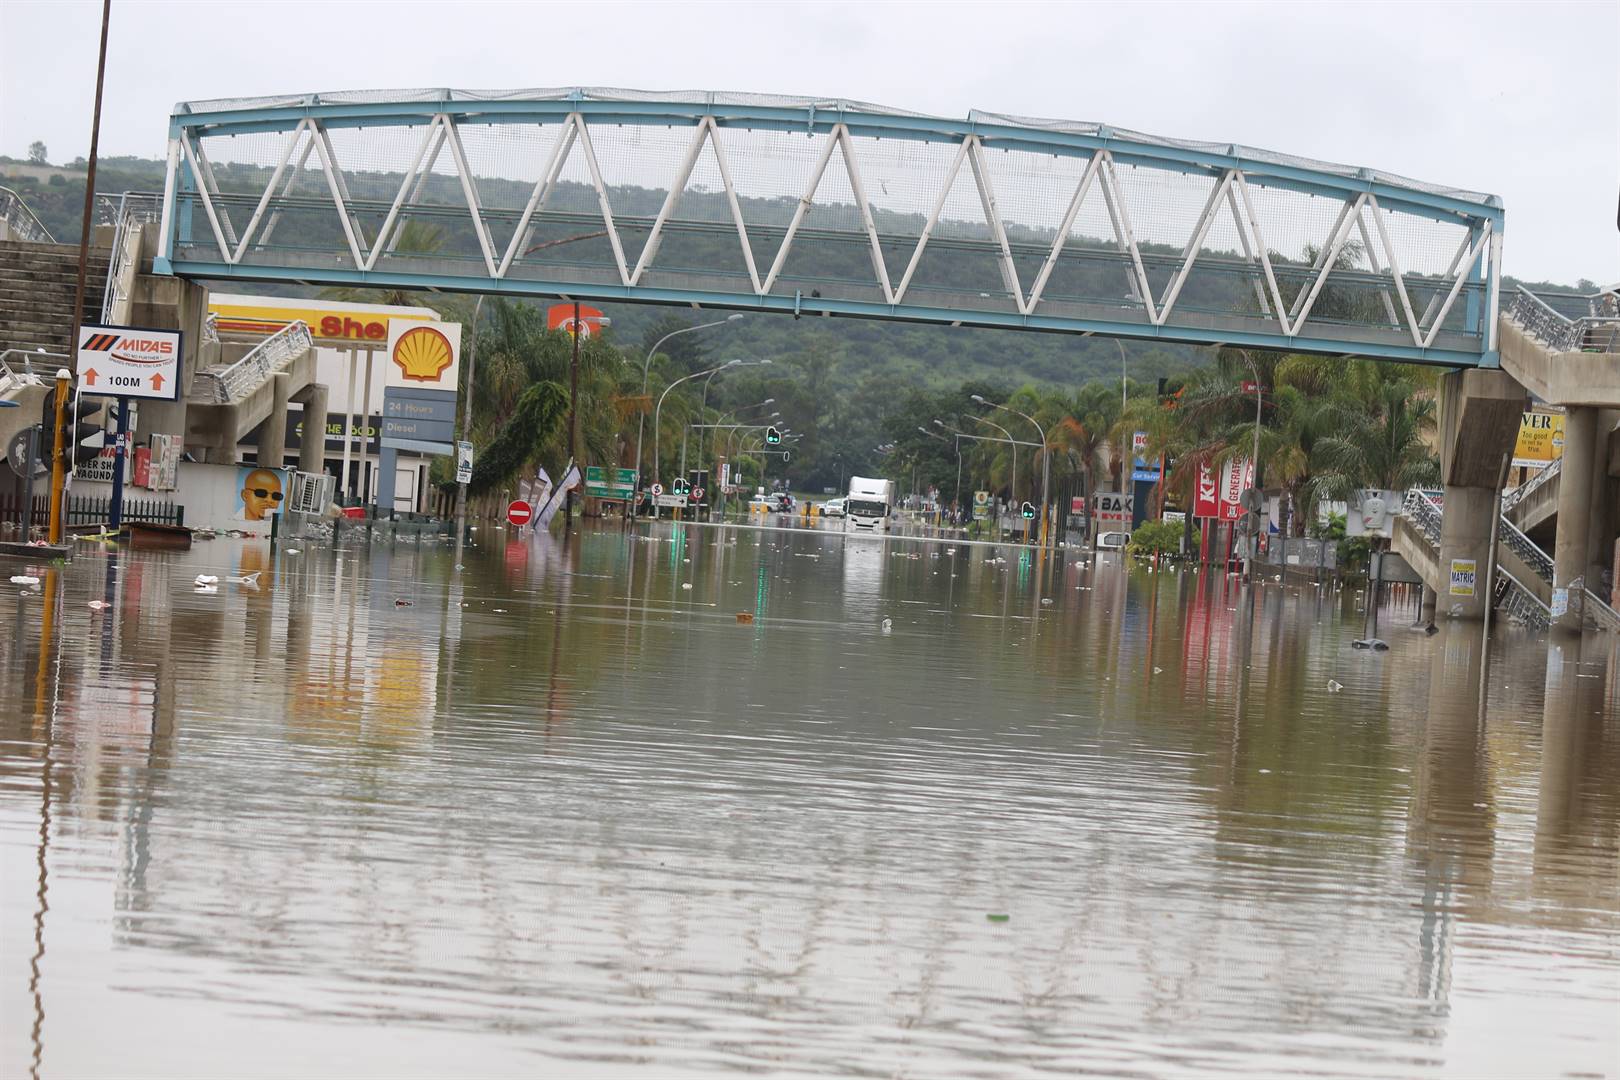 SA declares state of disaster after rain, flood damage - News24